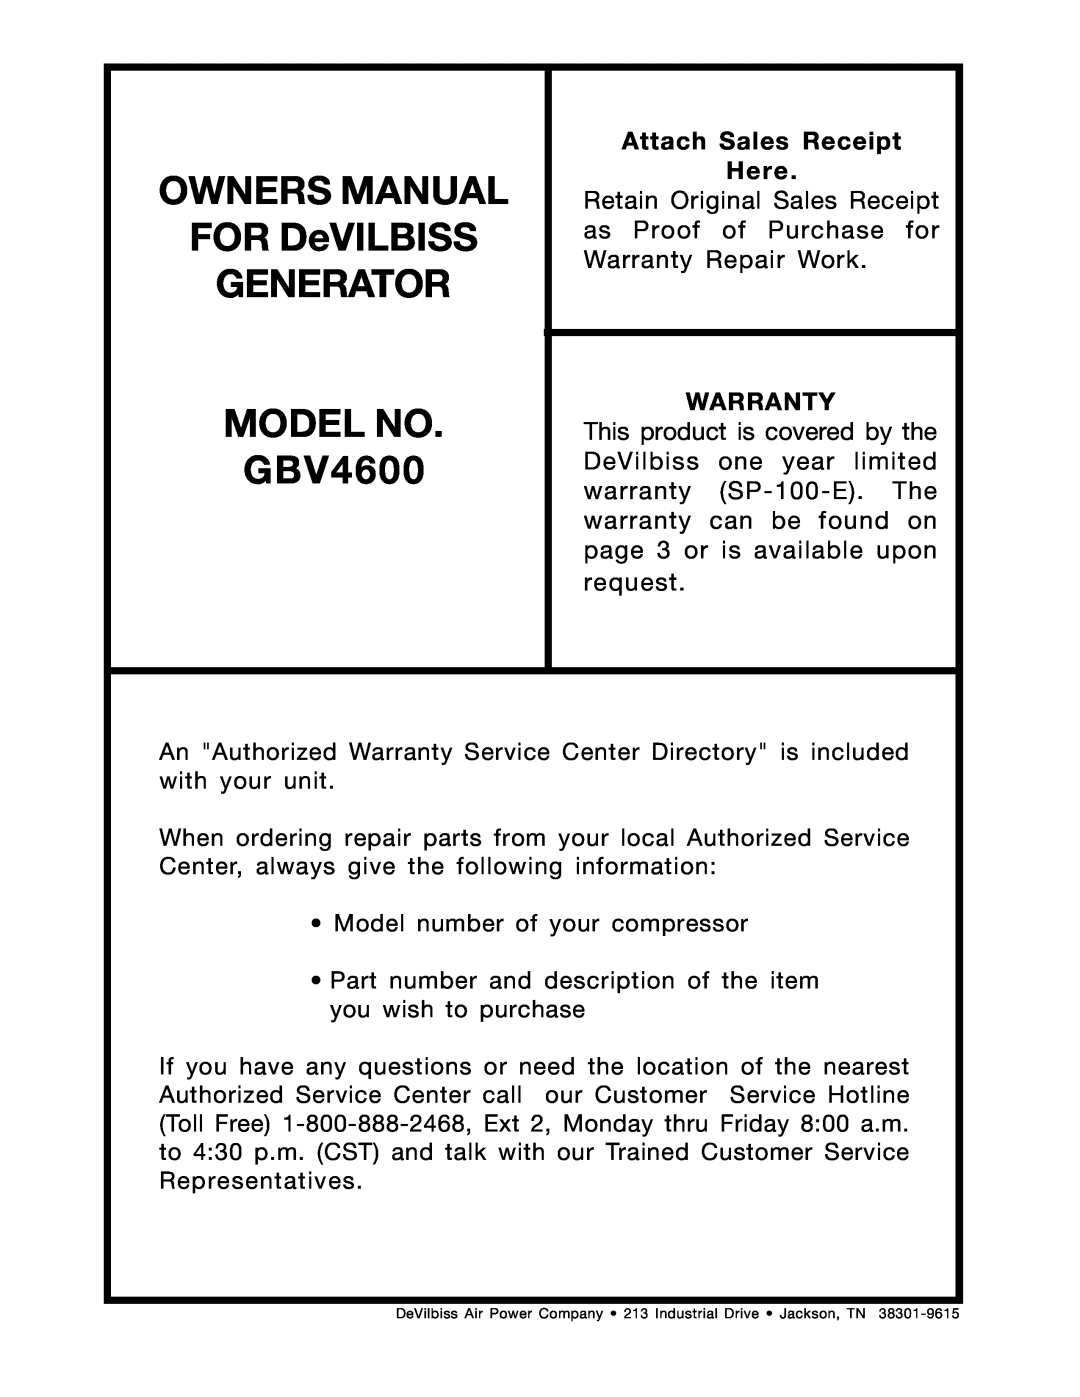 DeVillbiss Air Power Company MGP-4600 owner manual GBV4600, Attach Sales Receipt Here, Warranty 